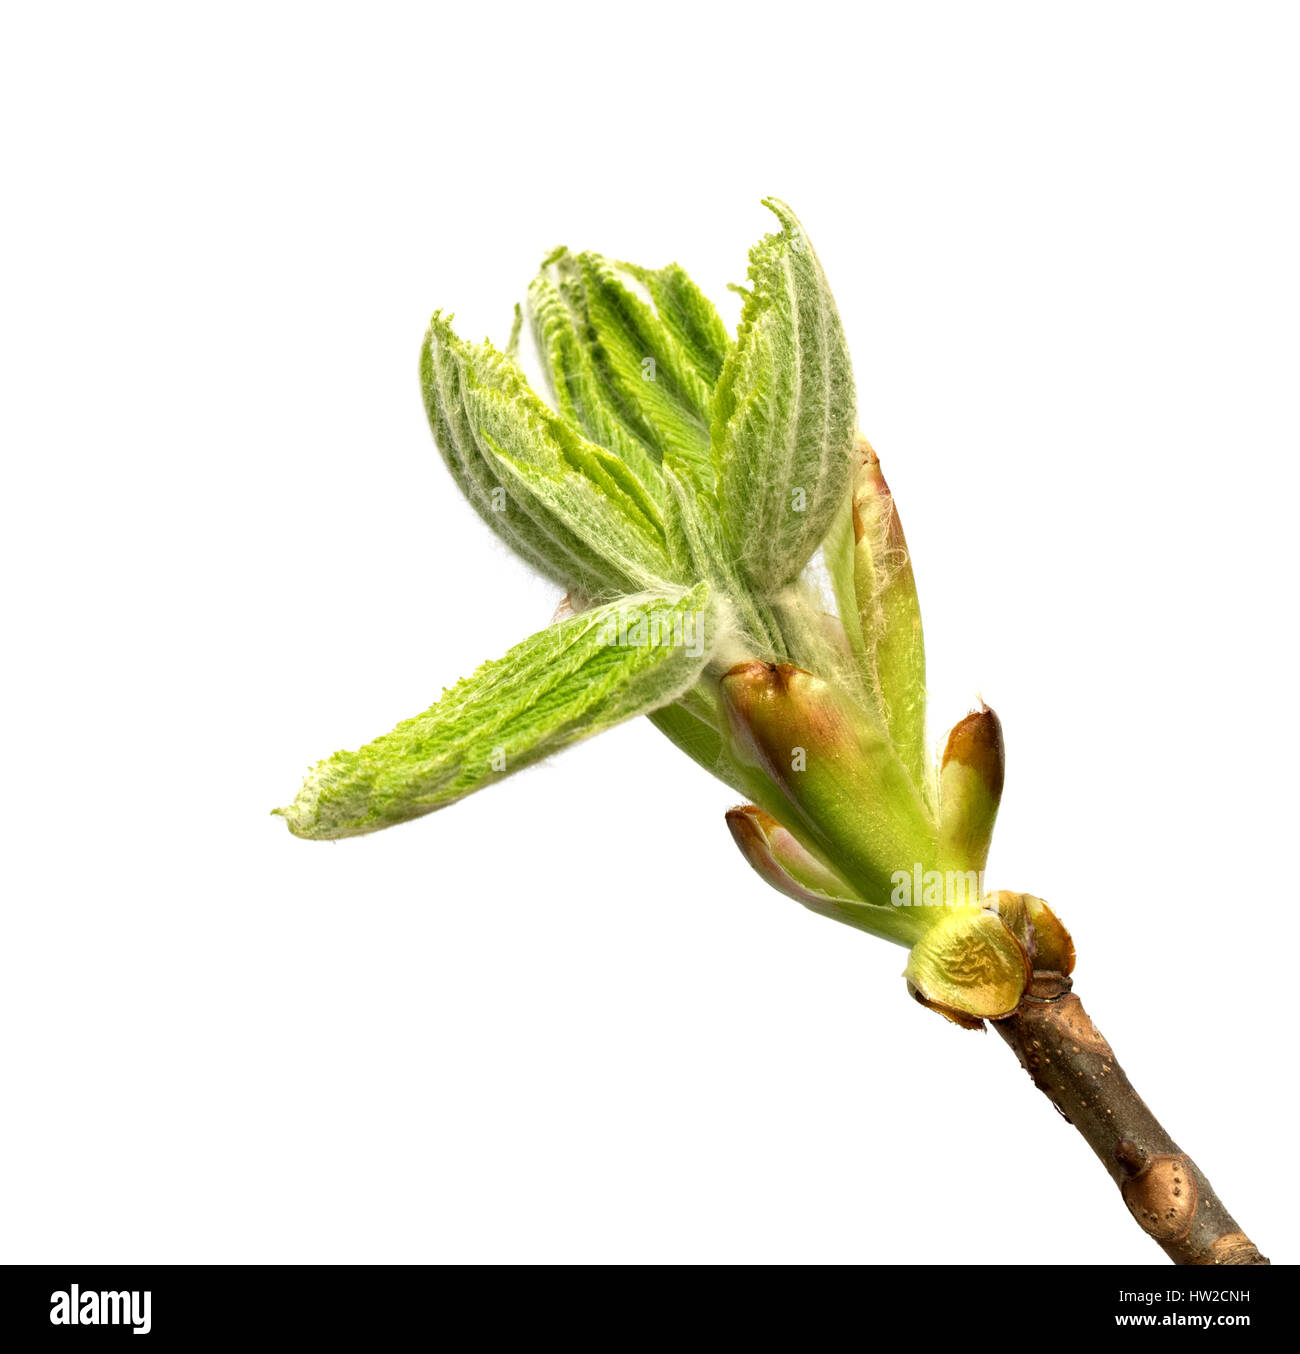 Spring twig of horse chestnut tree (Aesculus hippocastanum) with young green buds. Isolated on white background. Close-up view. Stock Photo